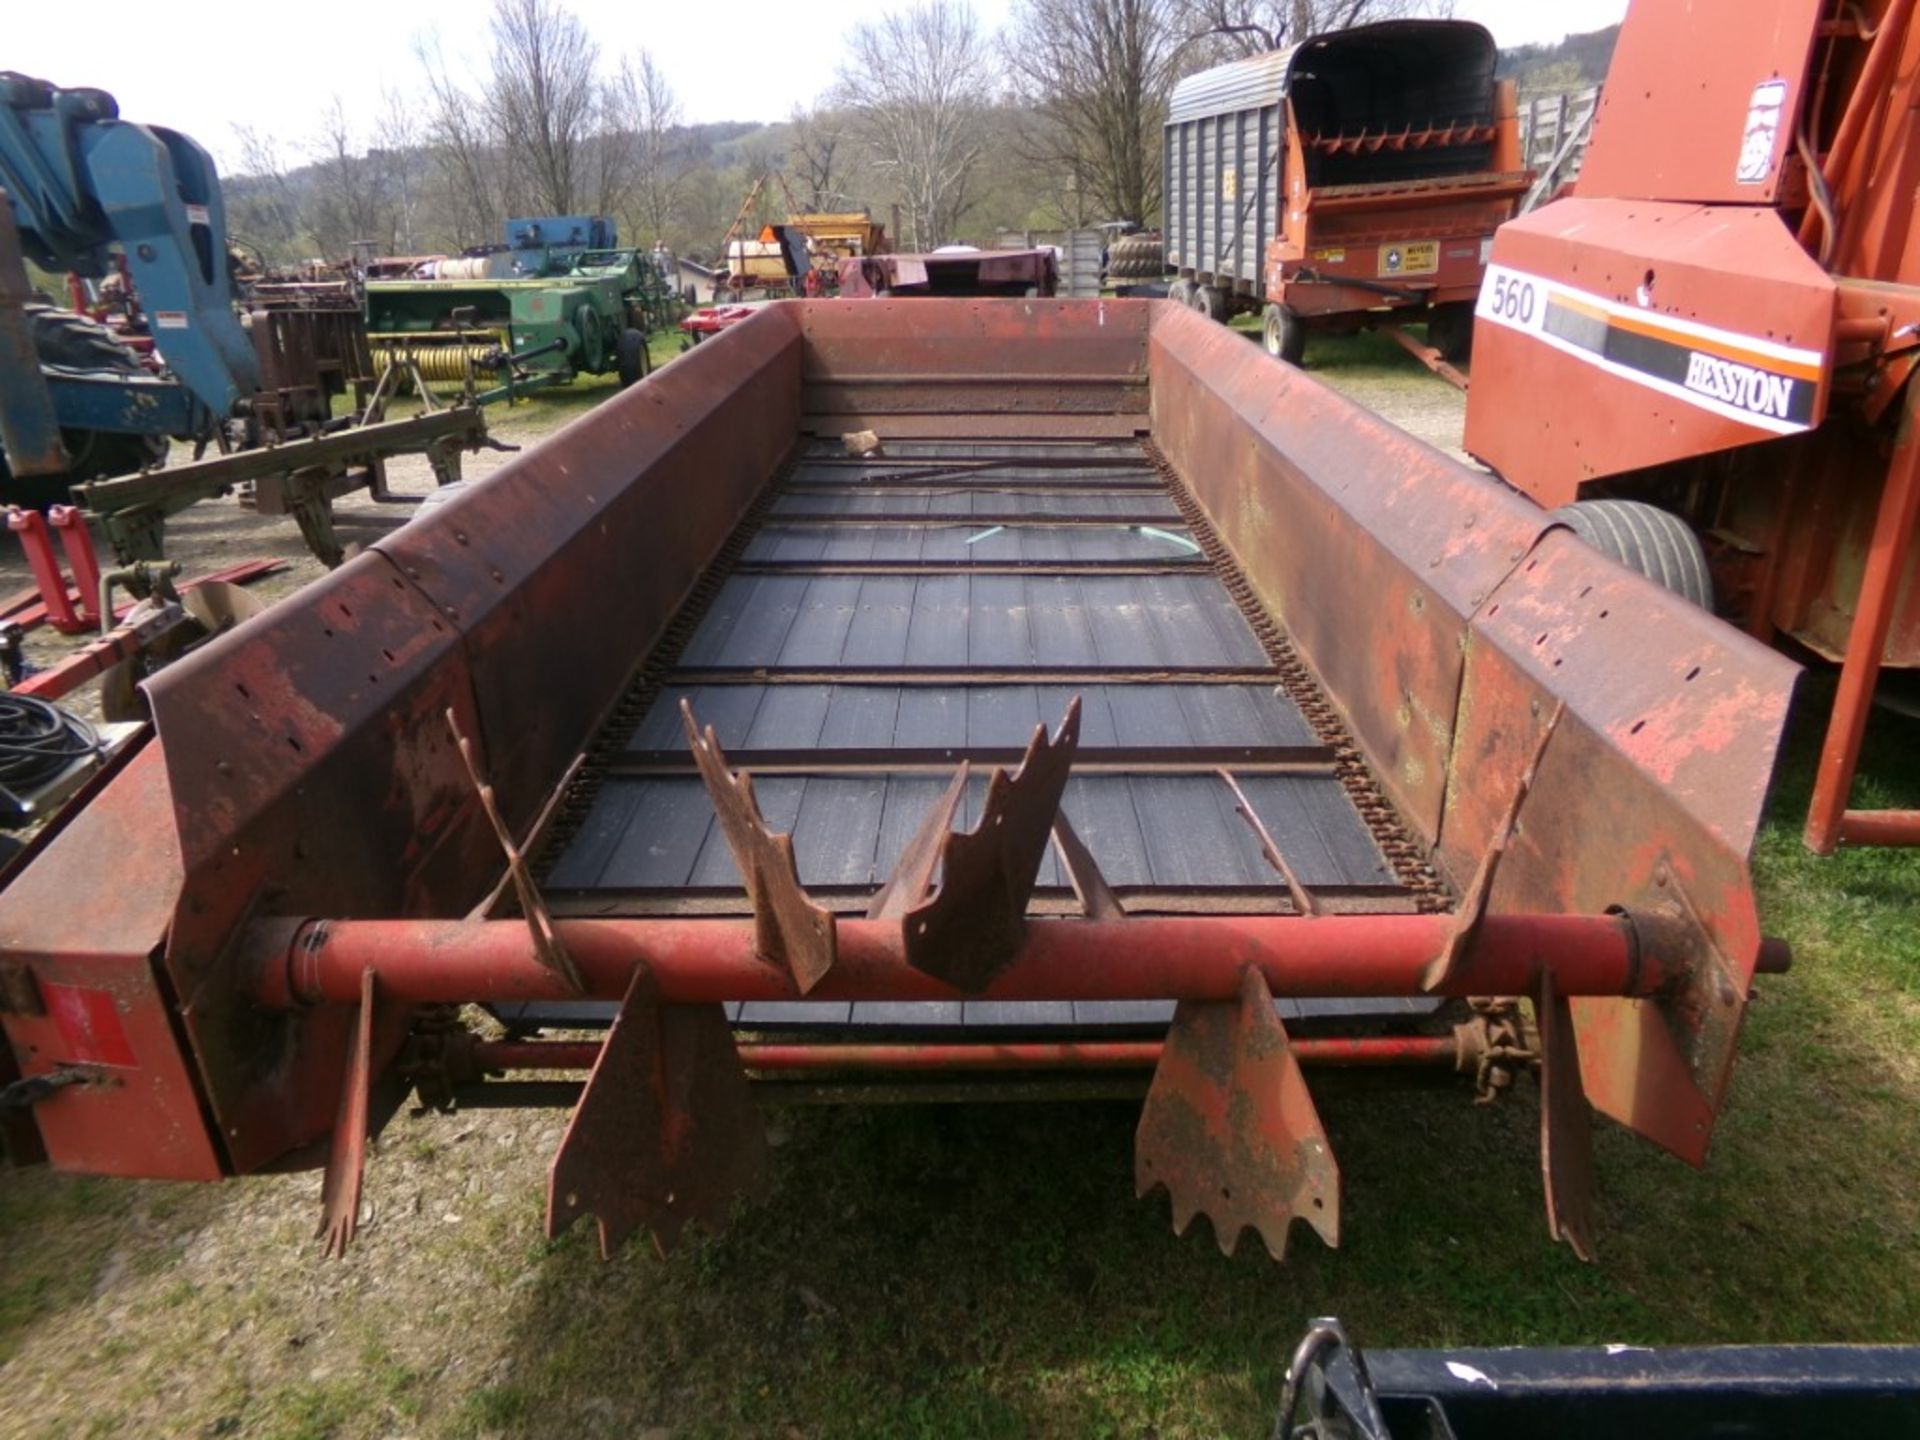 New Holland 165 Manure Spreader - Needs Chain Fixed (4391) - Image 3 of 3